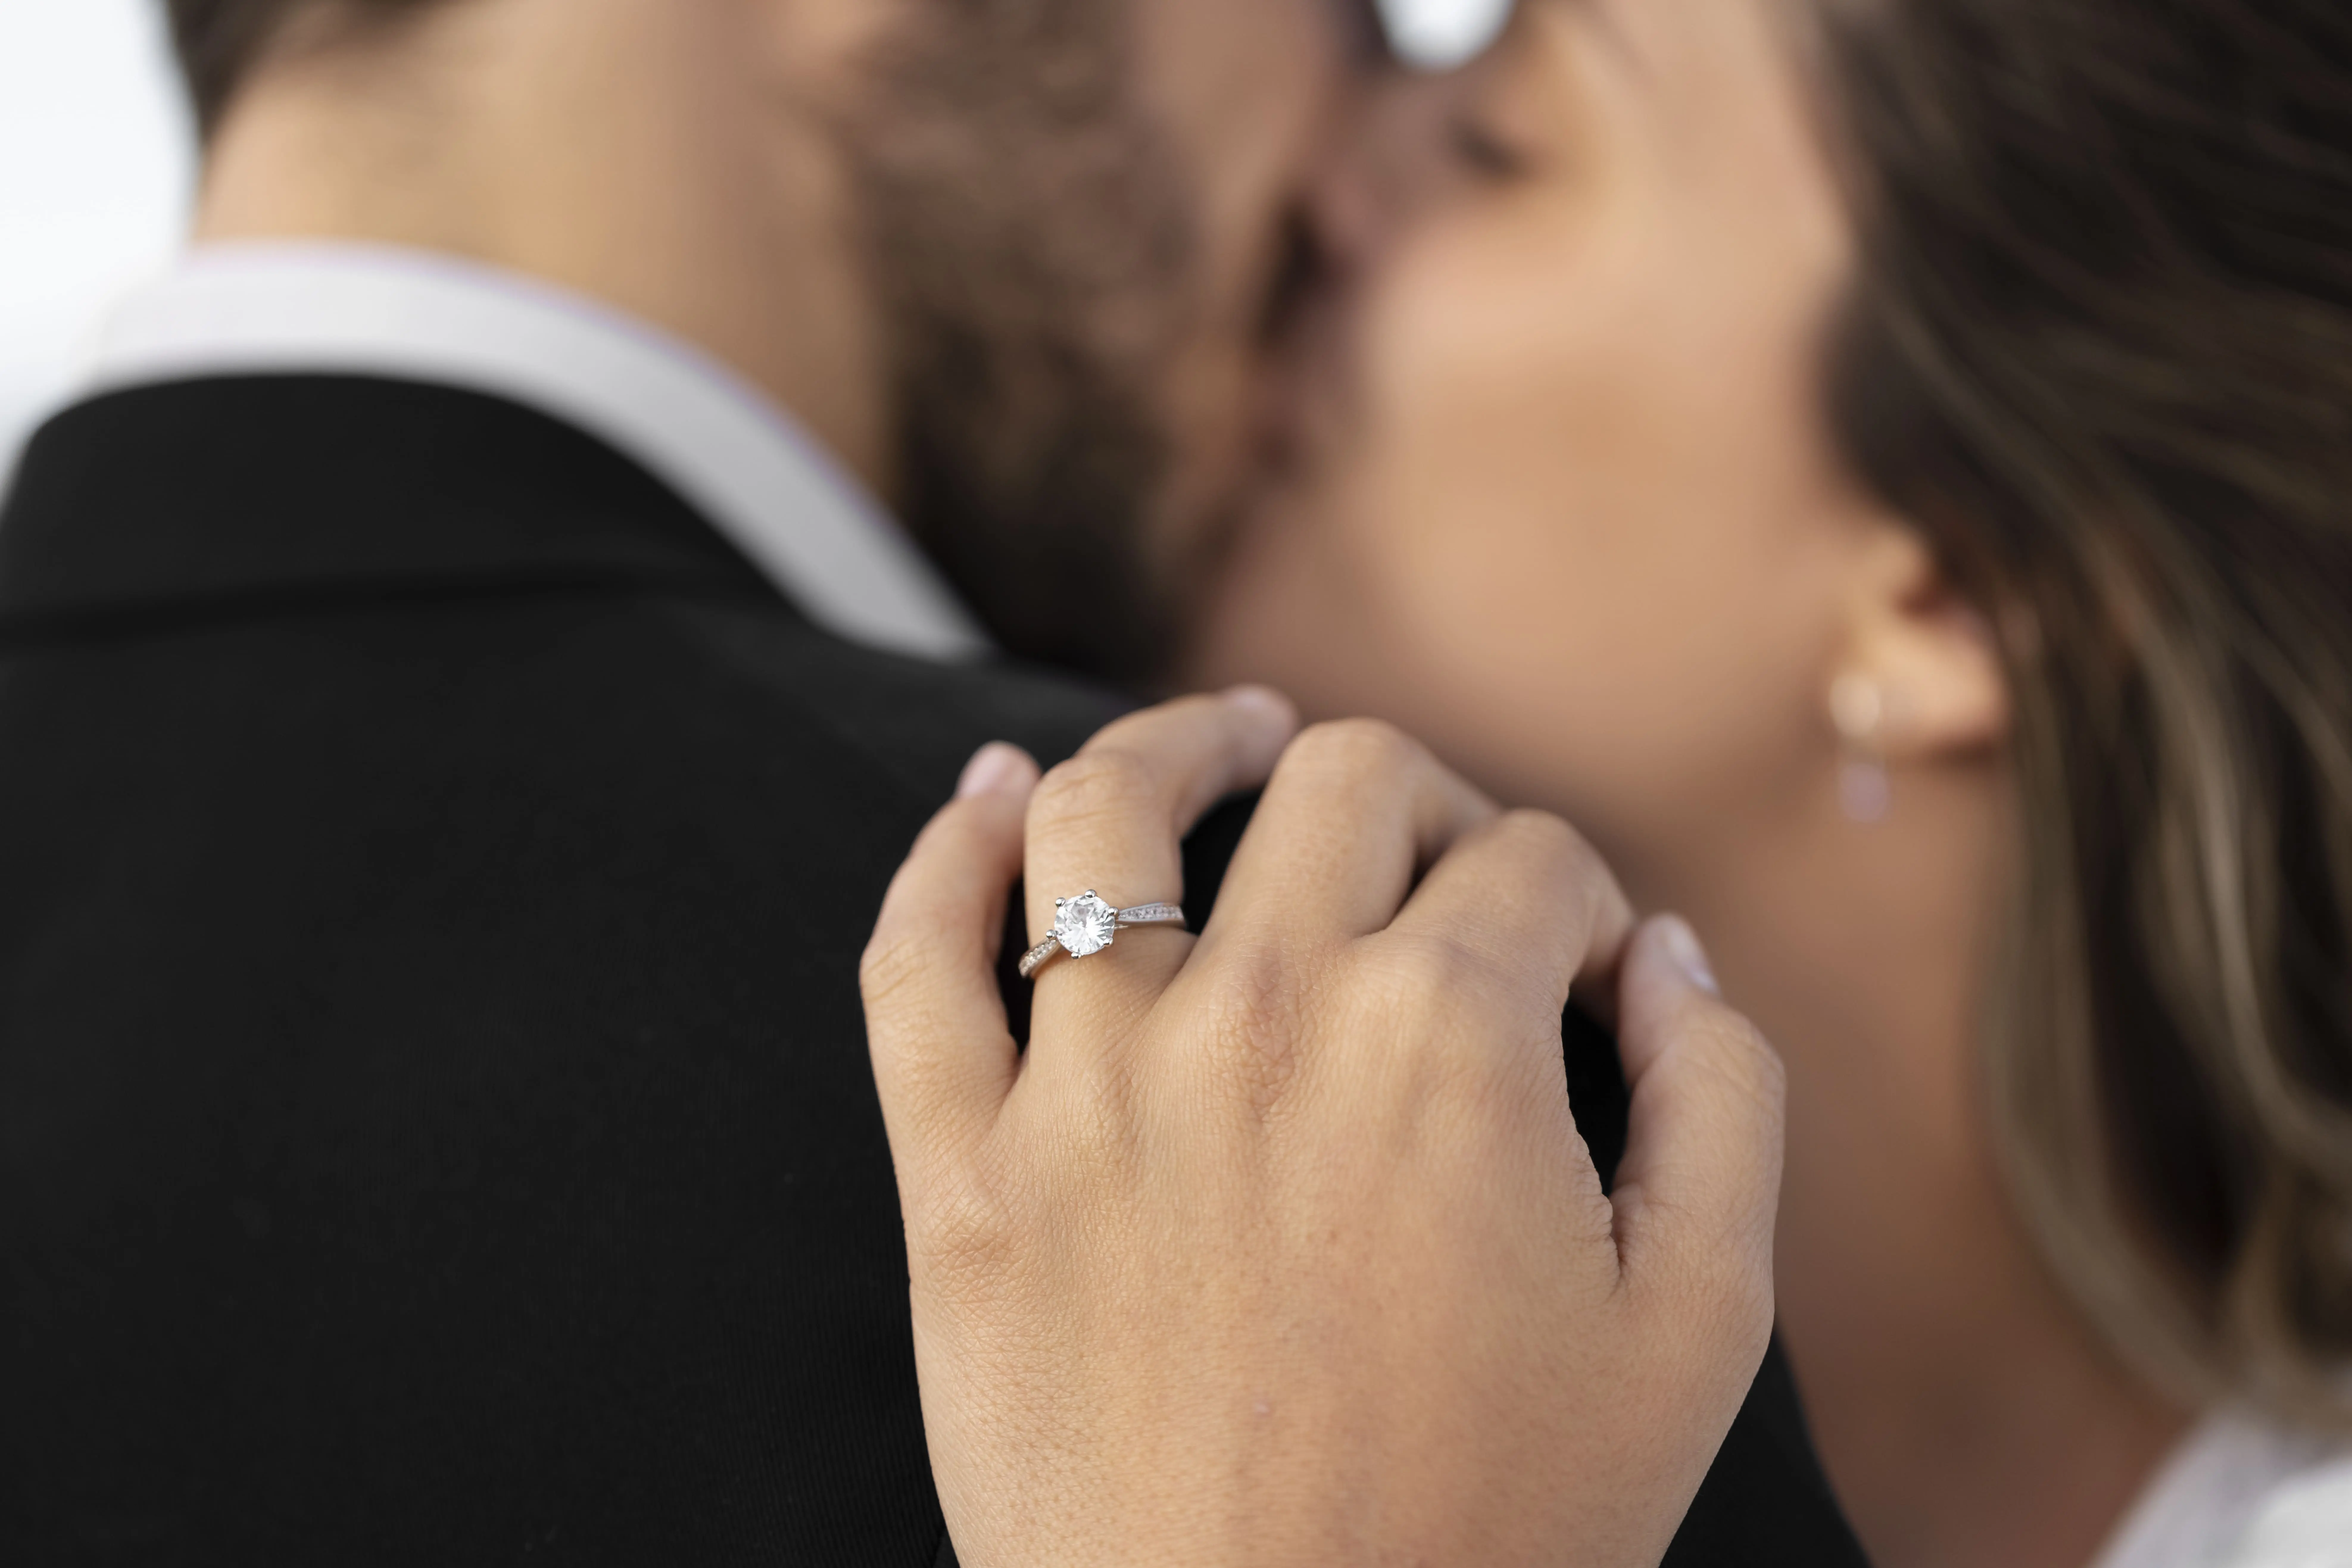 Woman and man in a kiss and engagement ring in the foreground